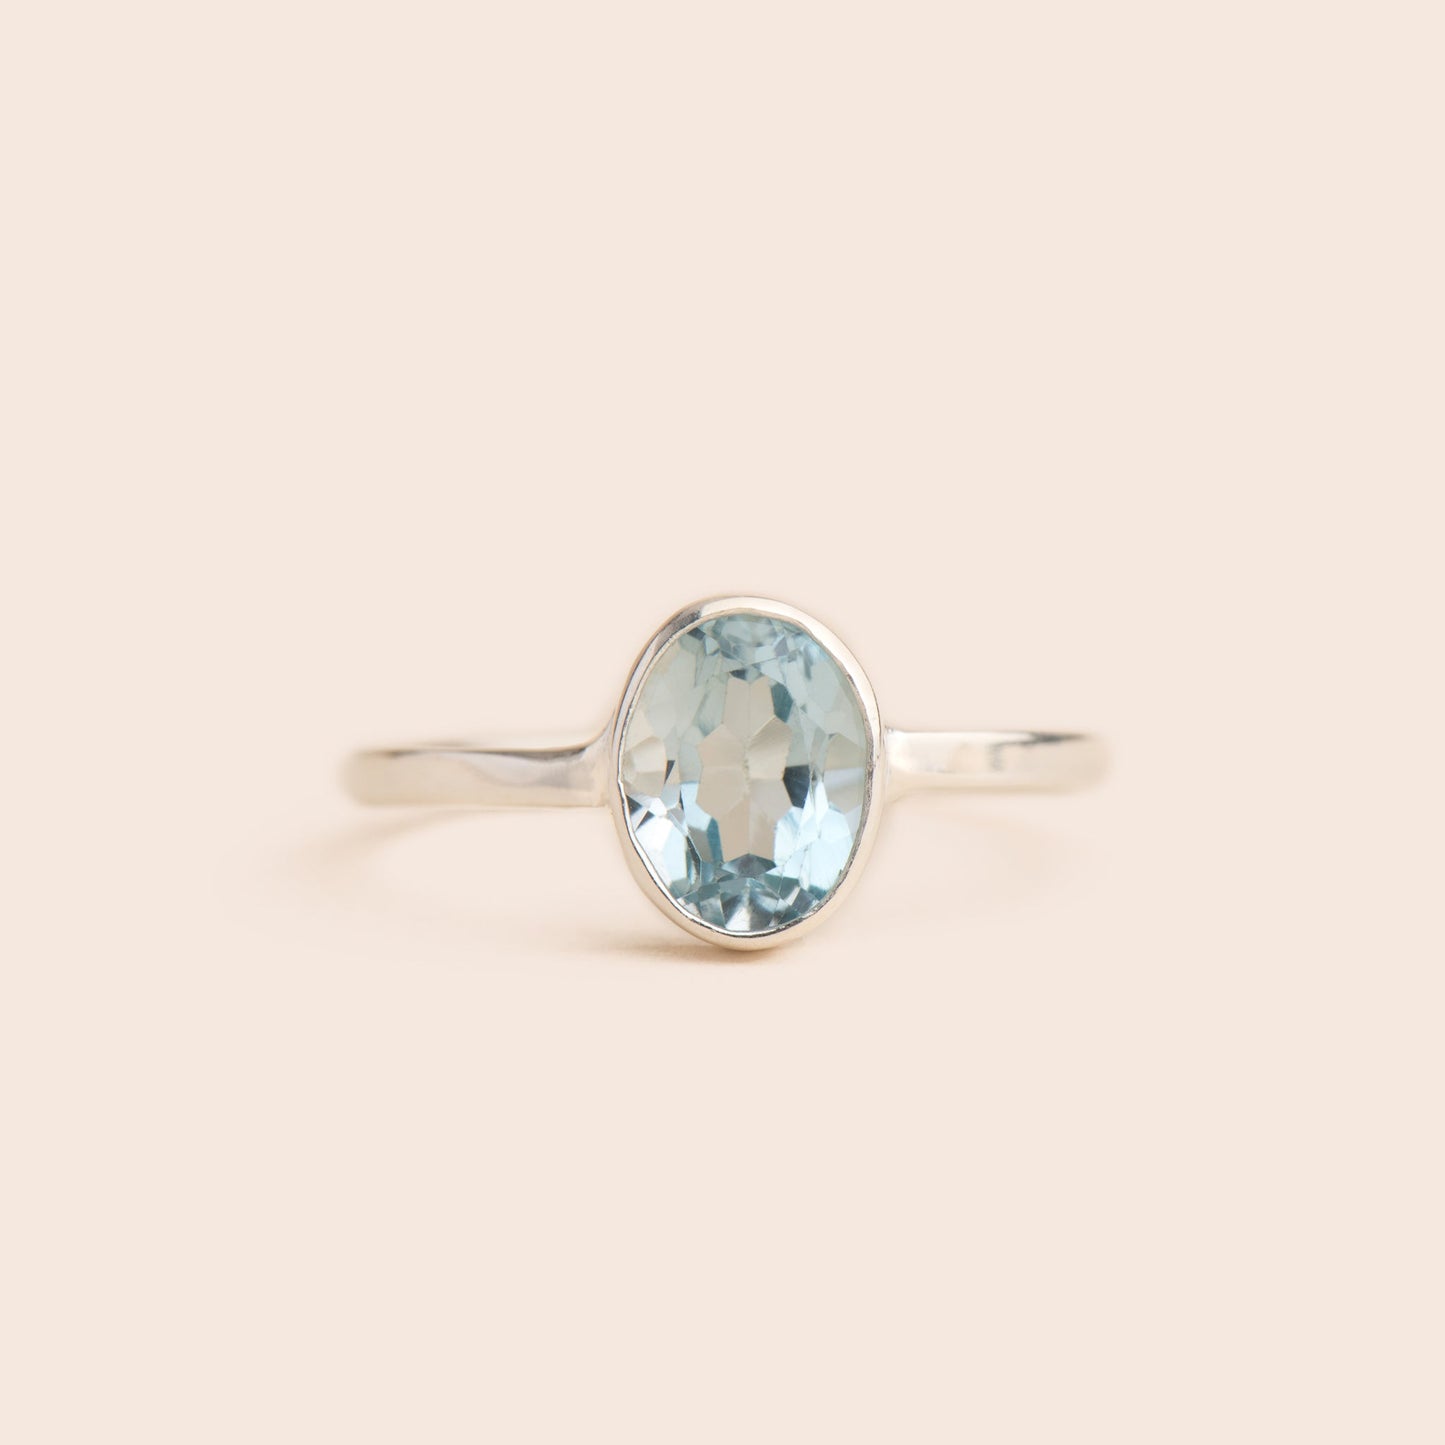 Aquamarine Oval Sterling Silver Ring - Gemlet